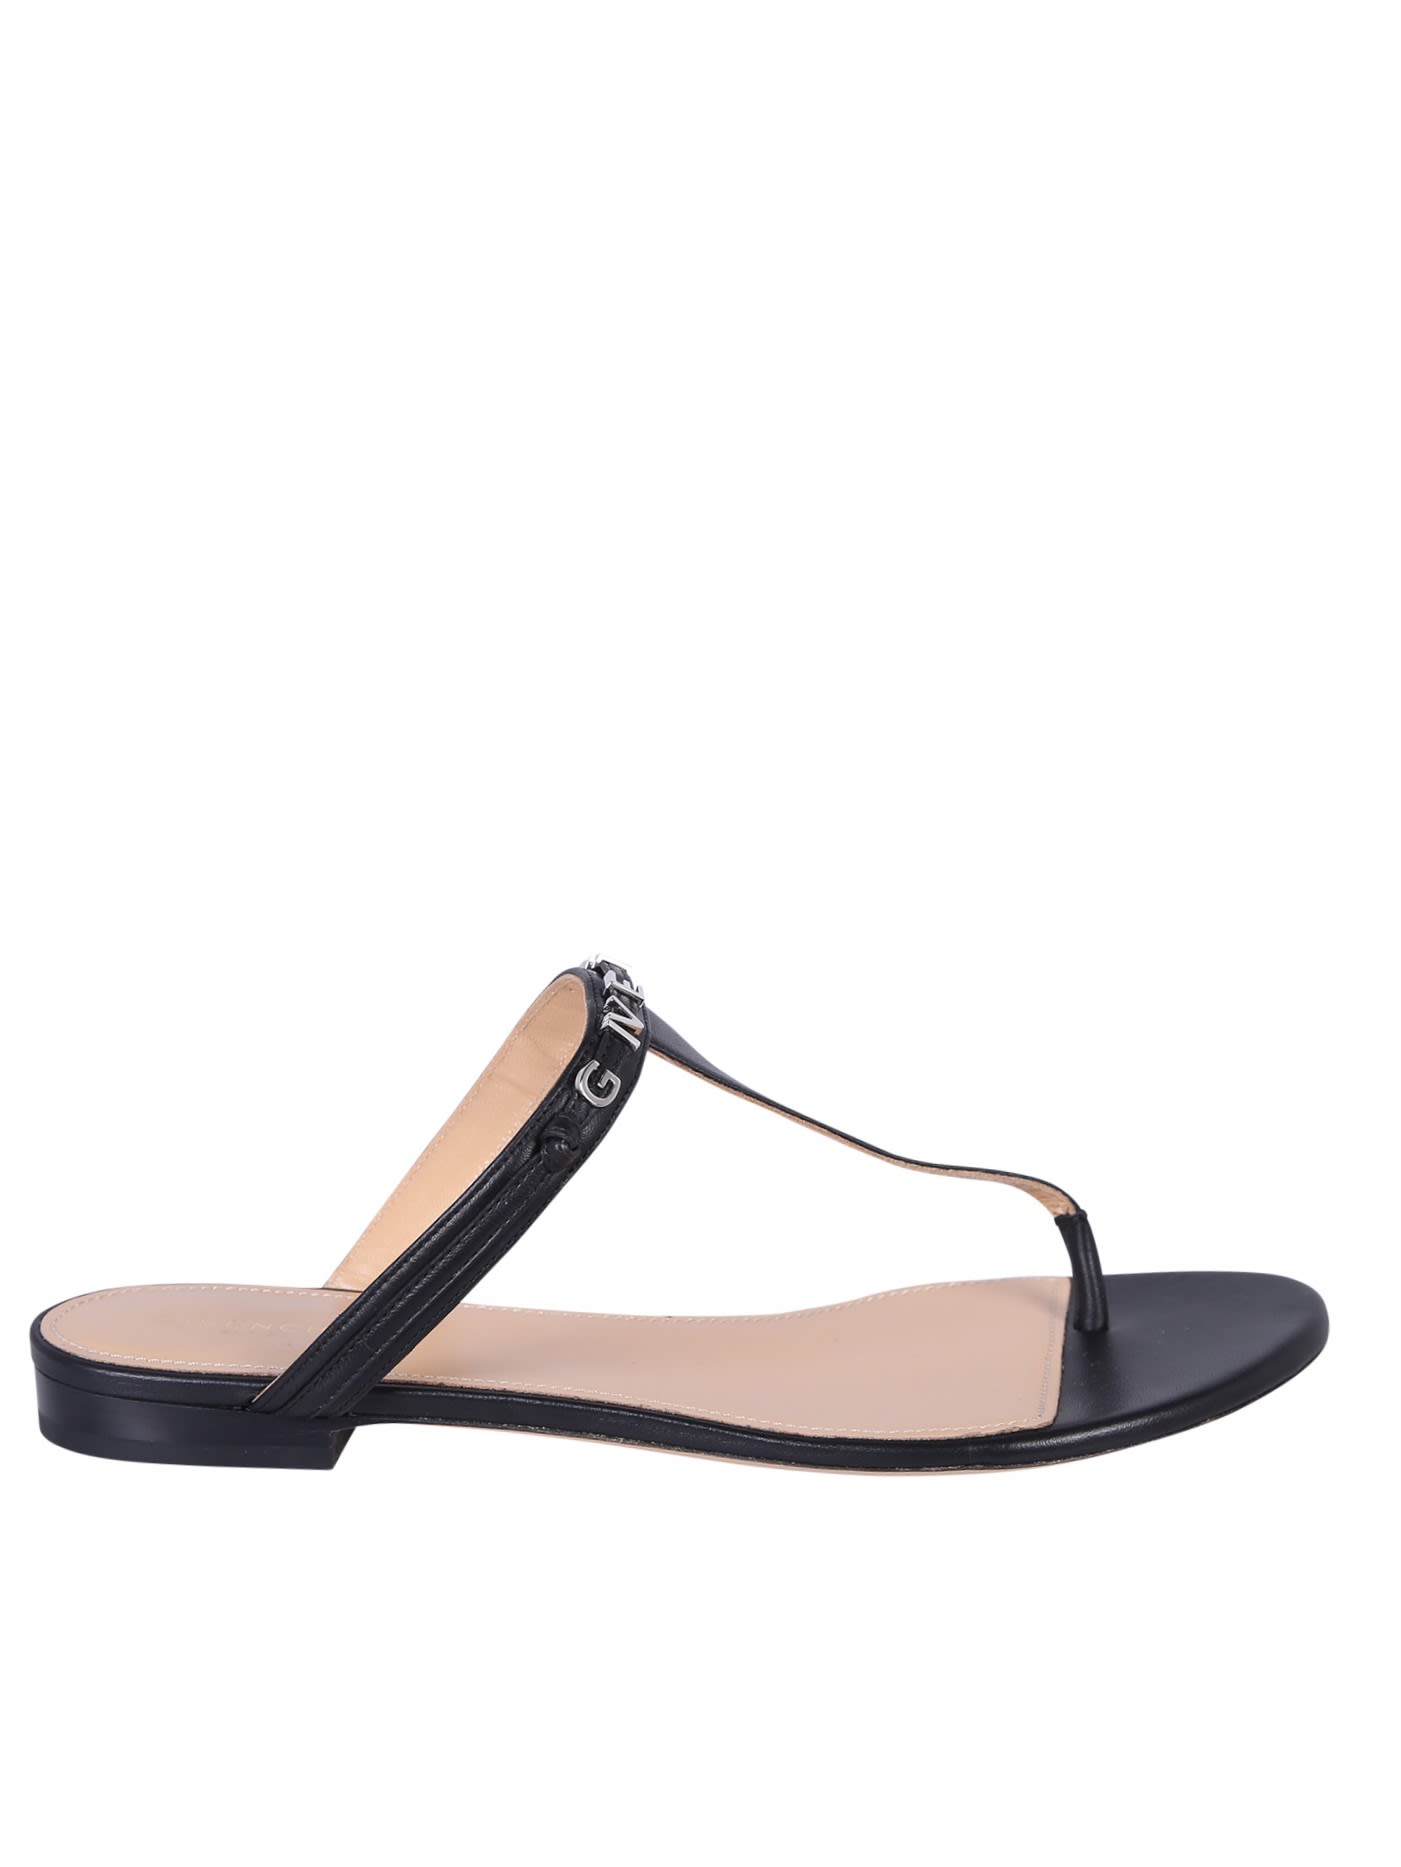 Buy Givenchy Branded Sandals online, shop Givenchy shoes with free shipping